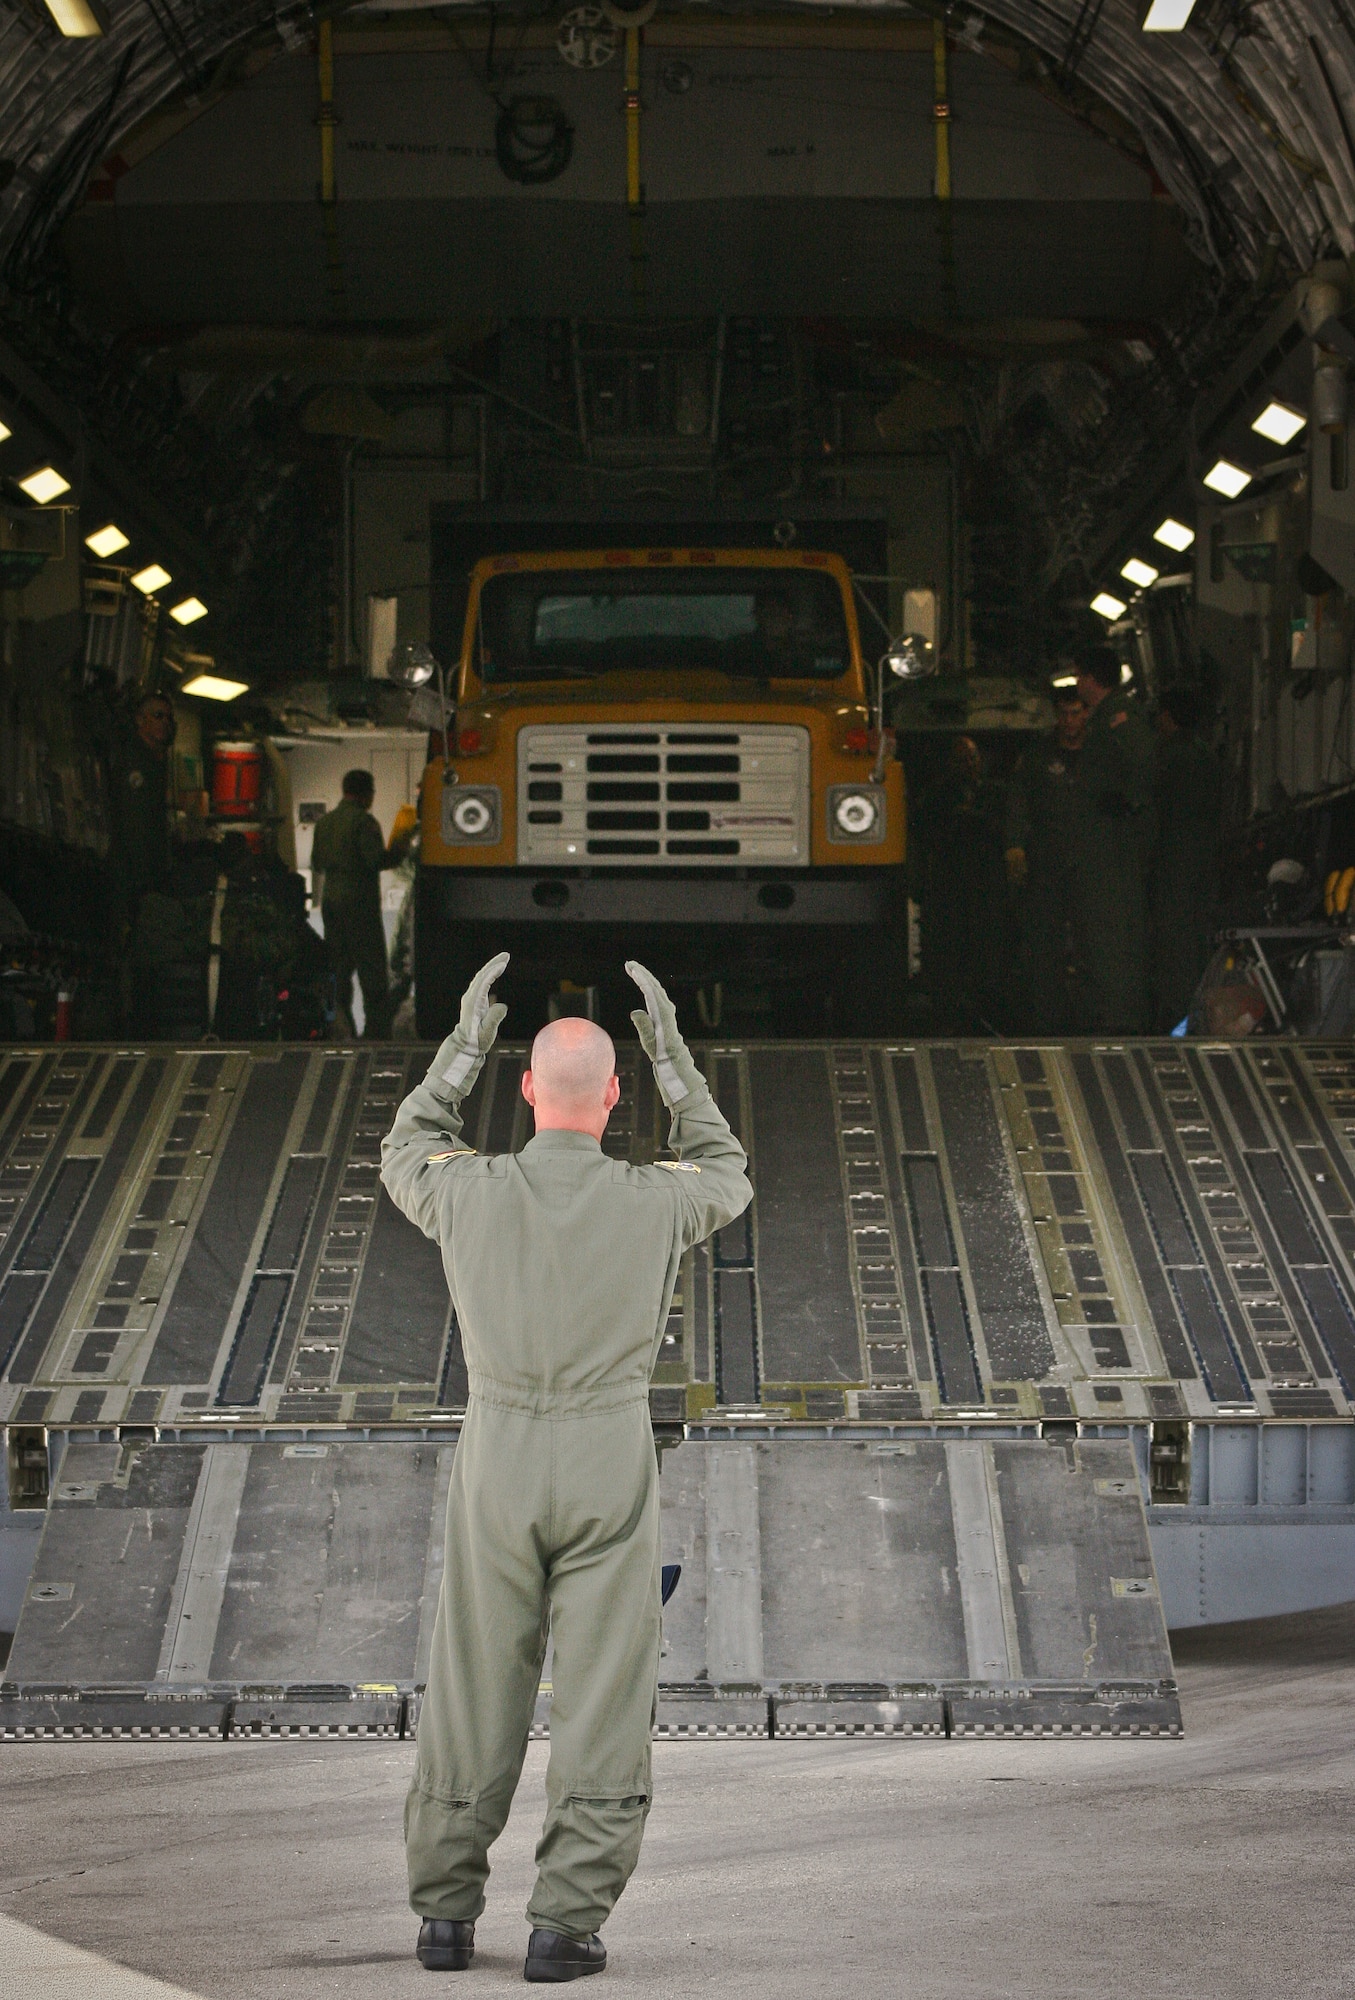 Technical Sergeant Arrin Baker of 300th Airlift Squadron marshals a dump truck out of the back of a C-17 Globemaster III during a humanitarian aid download in Haiti on July 1, 2011.